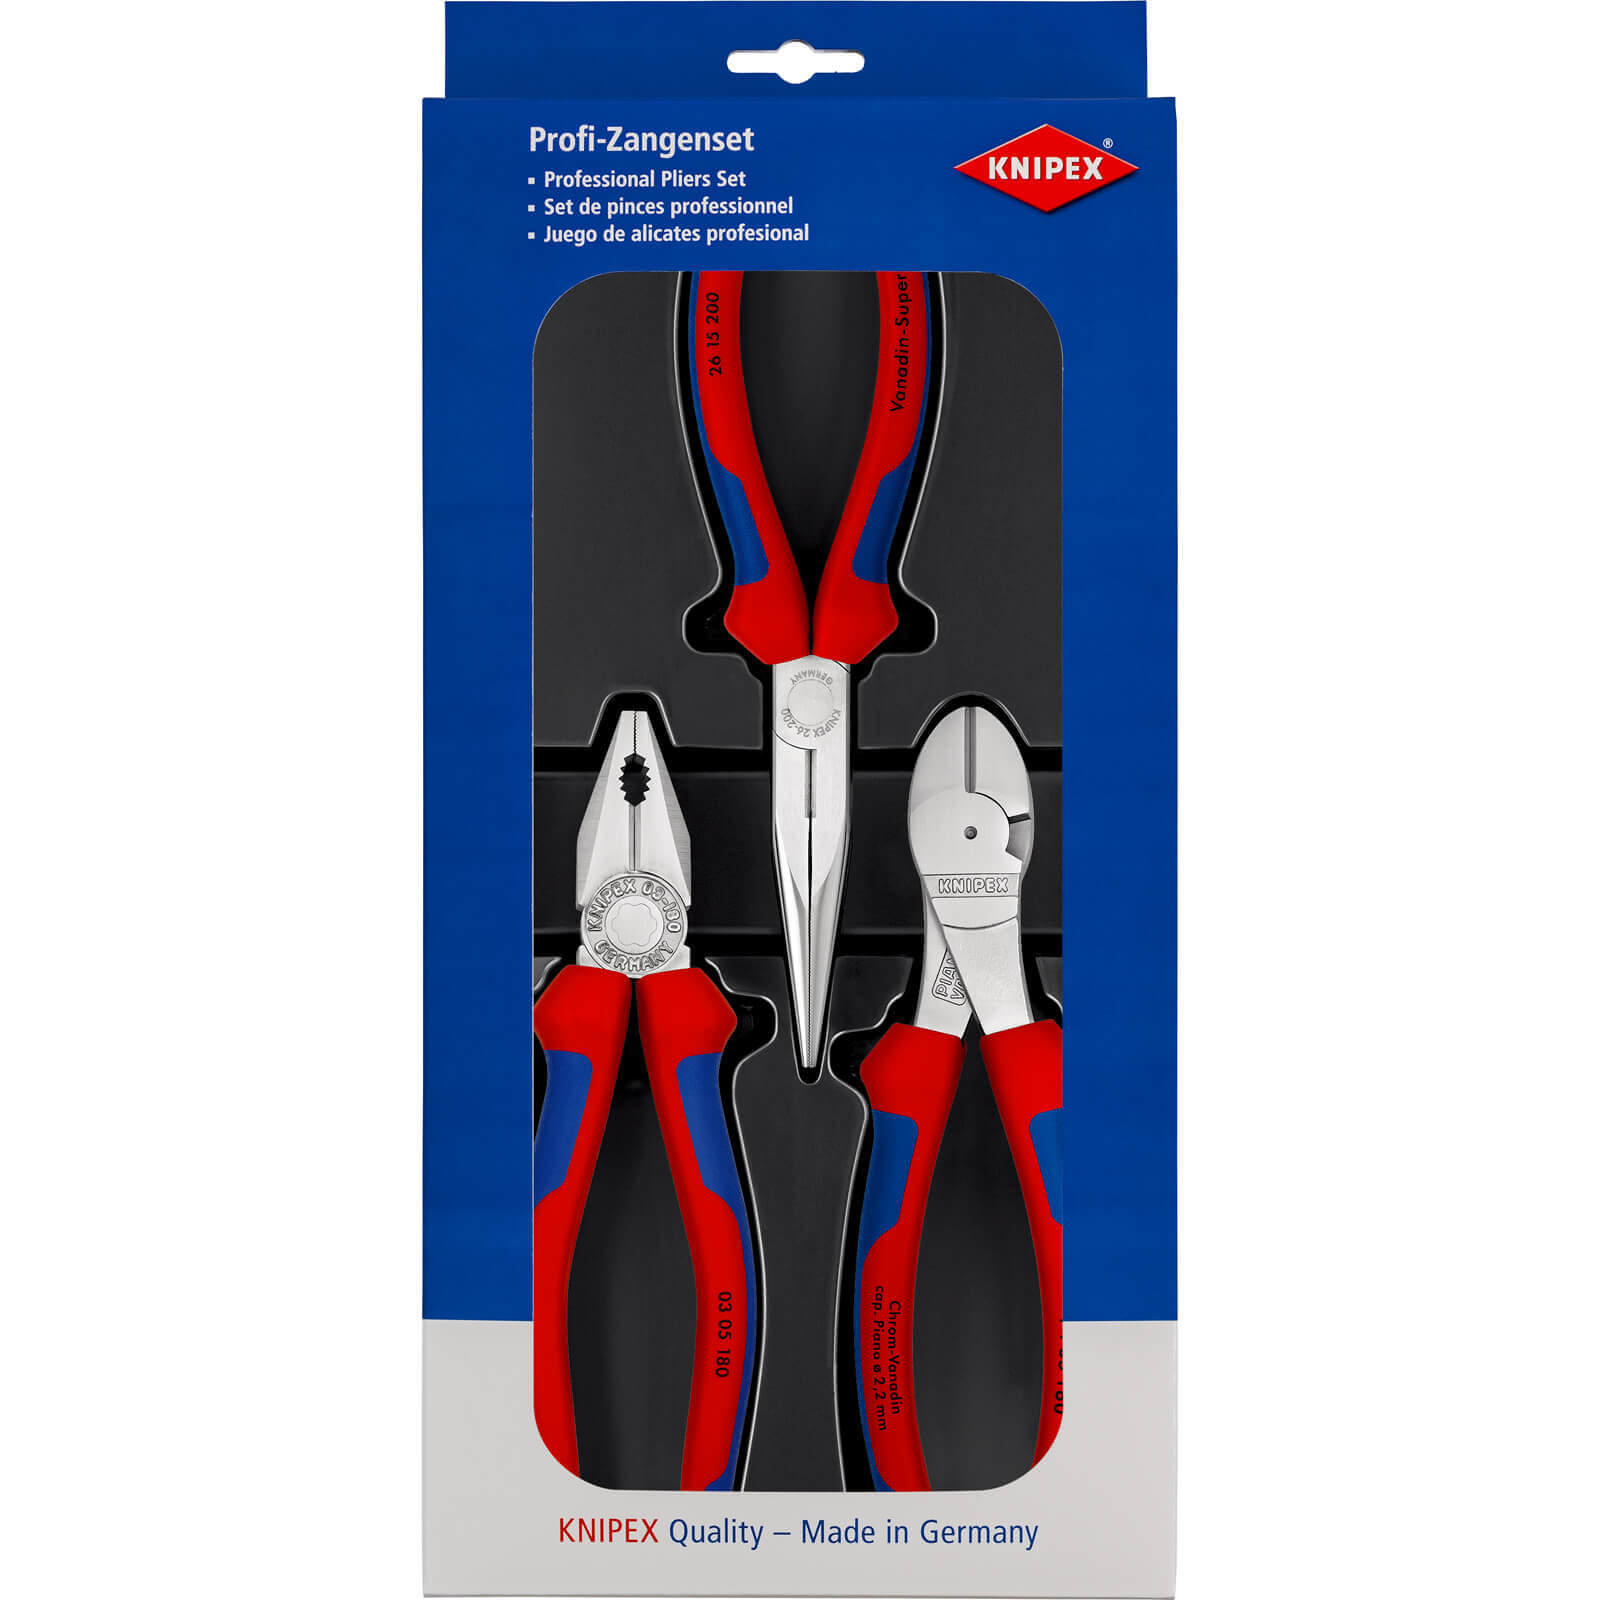 Knipex 3 Piece Professional Assembly Pliers Set